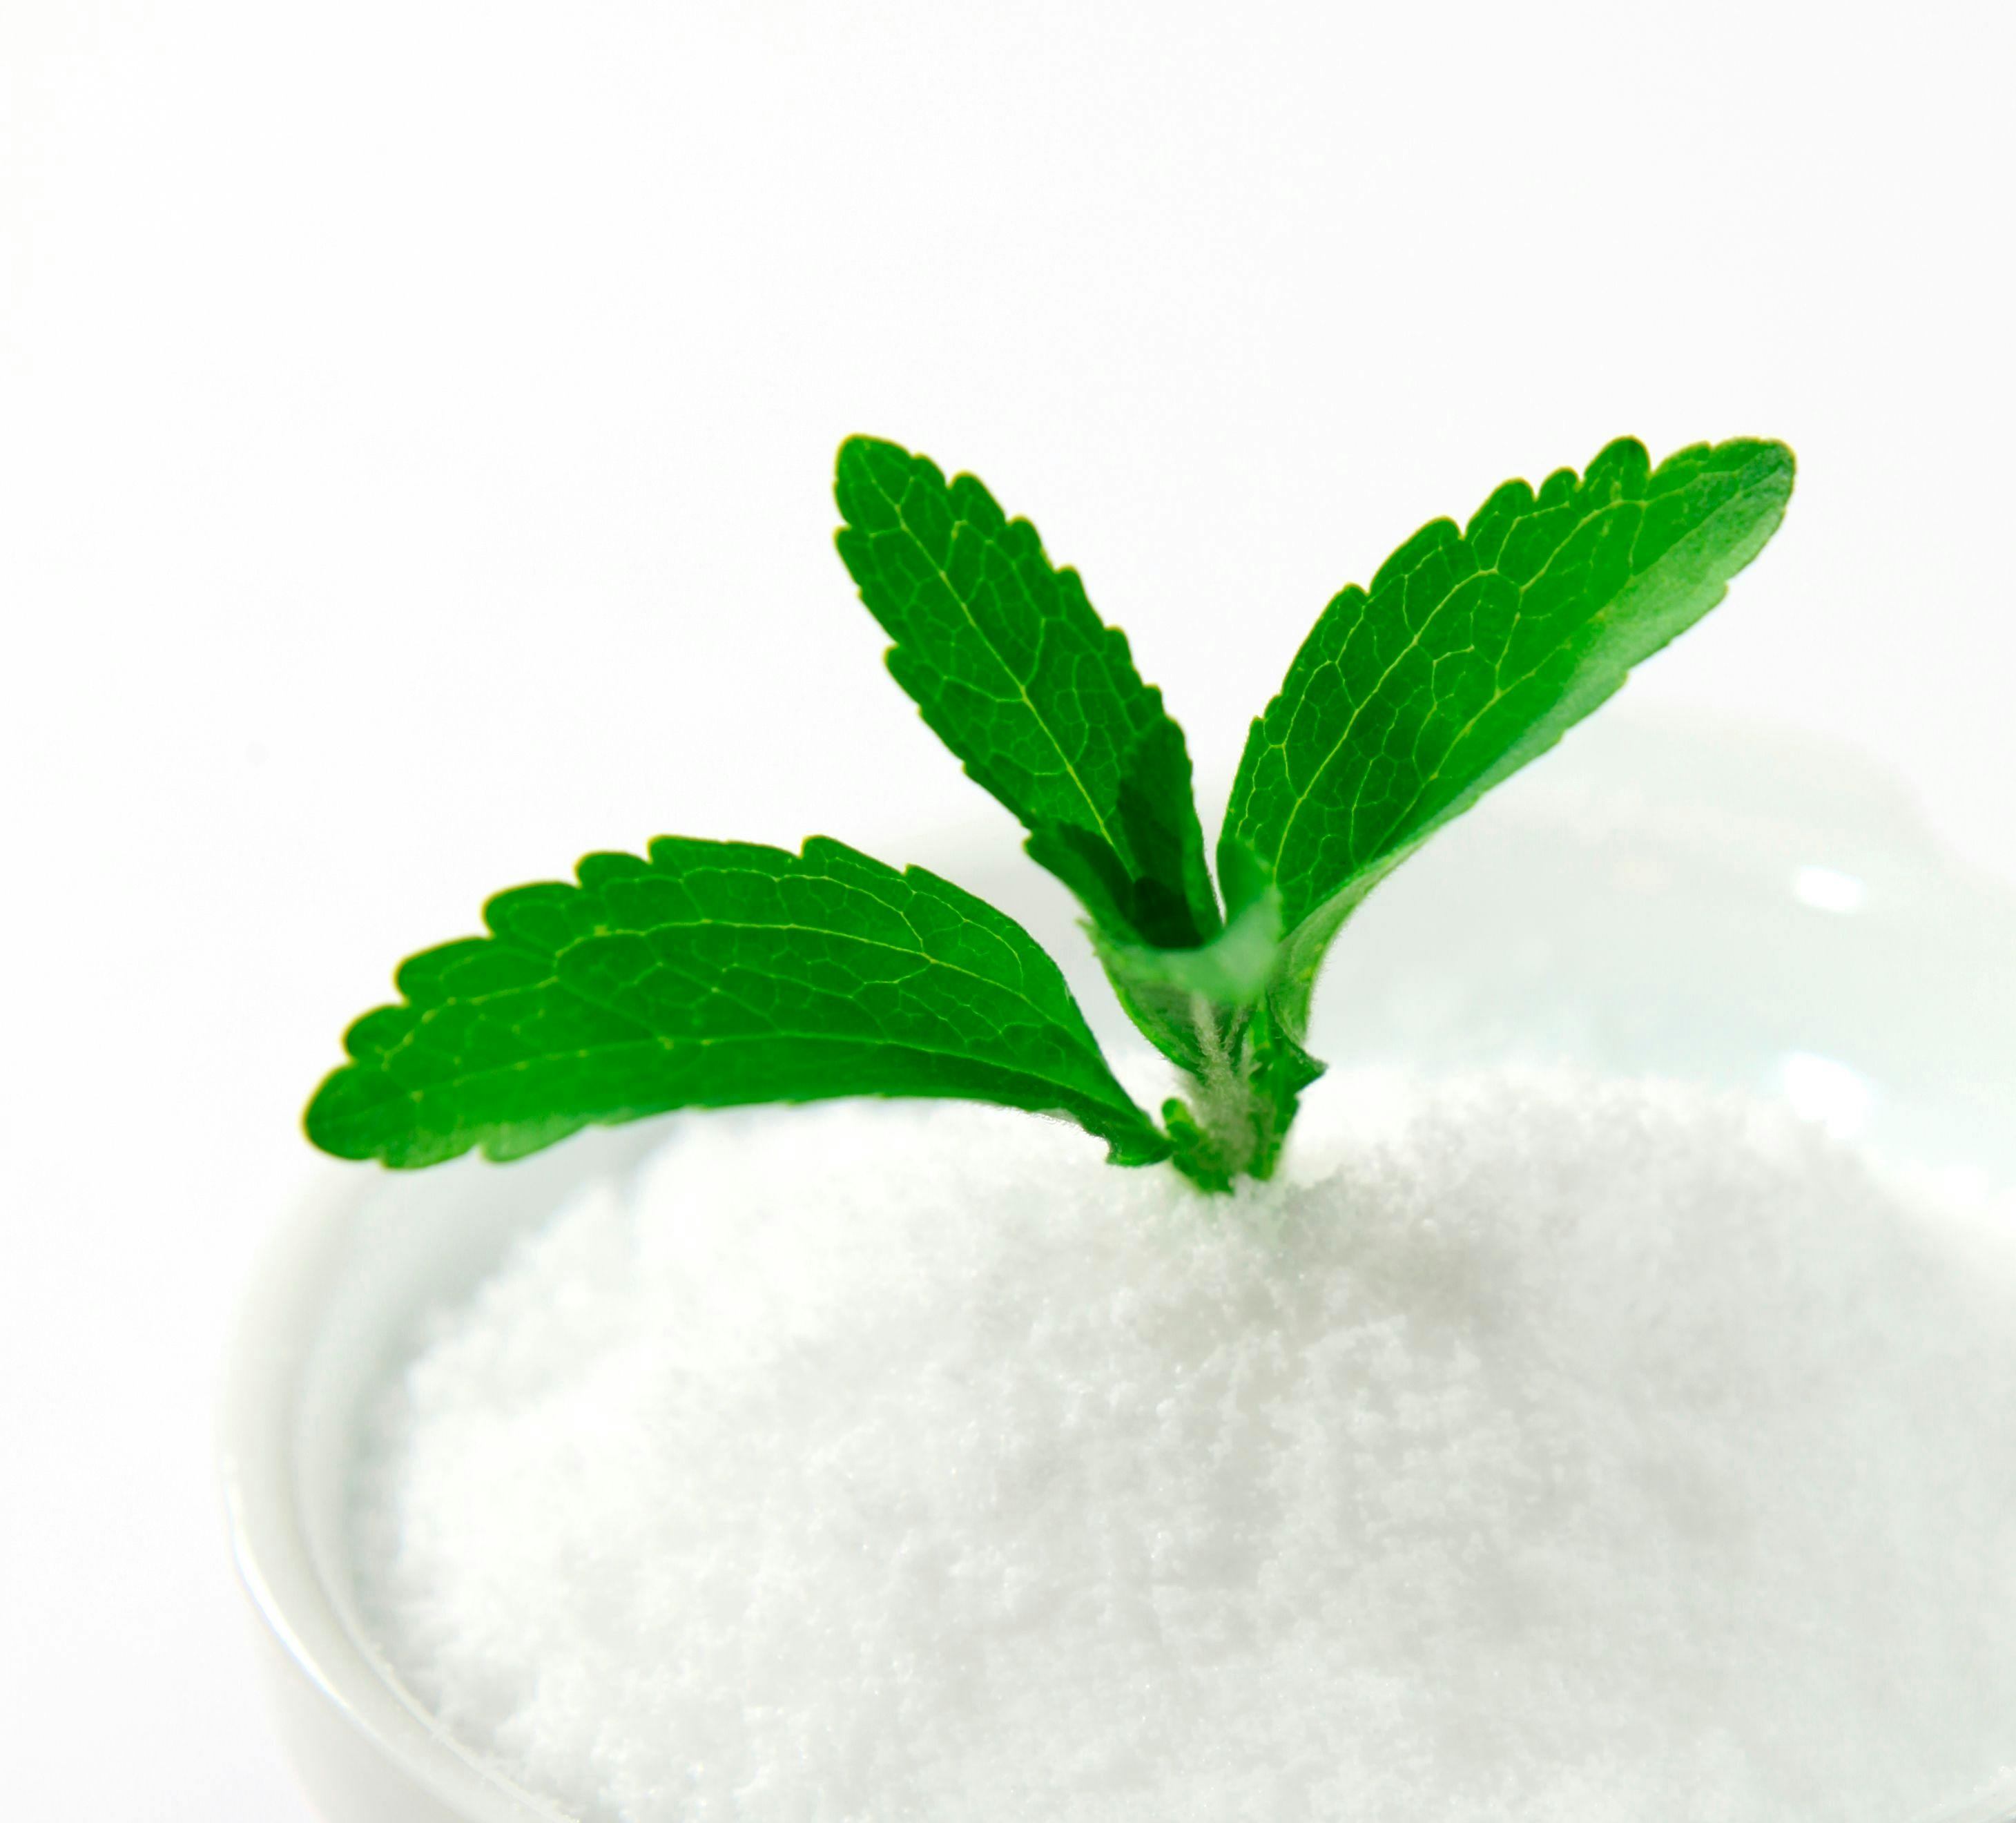 Cargill’s Reb M Reb D Fermented Stevia Will Be Commercial in 2016, SupplySide West Report